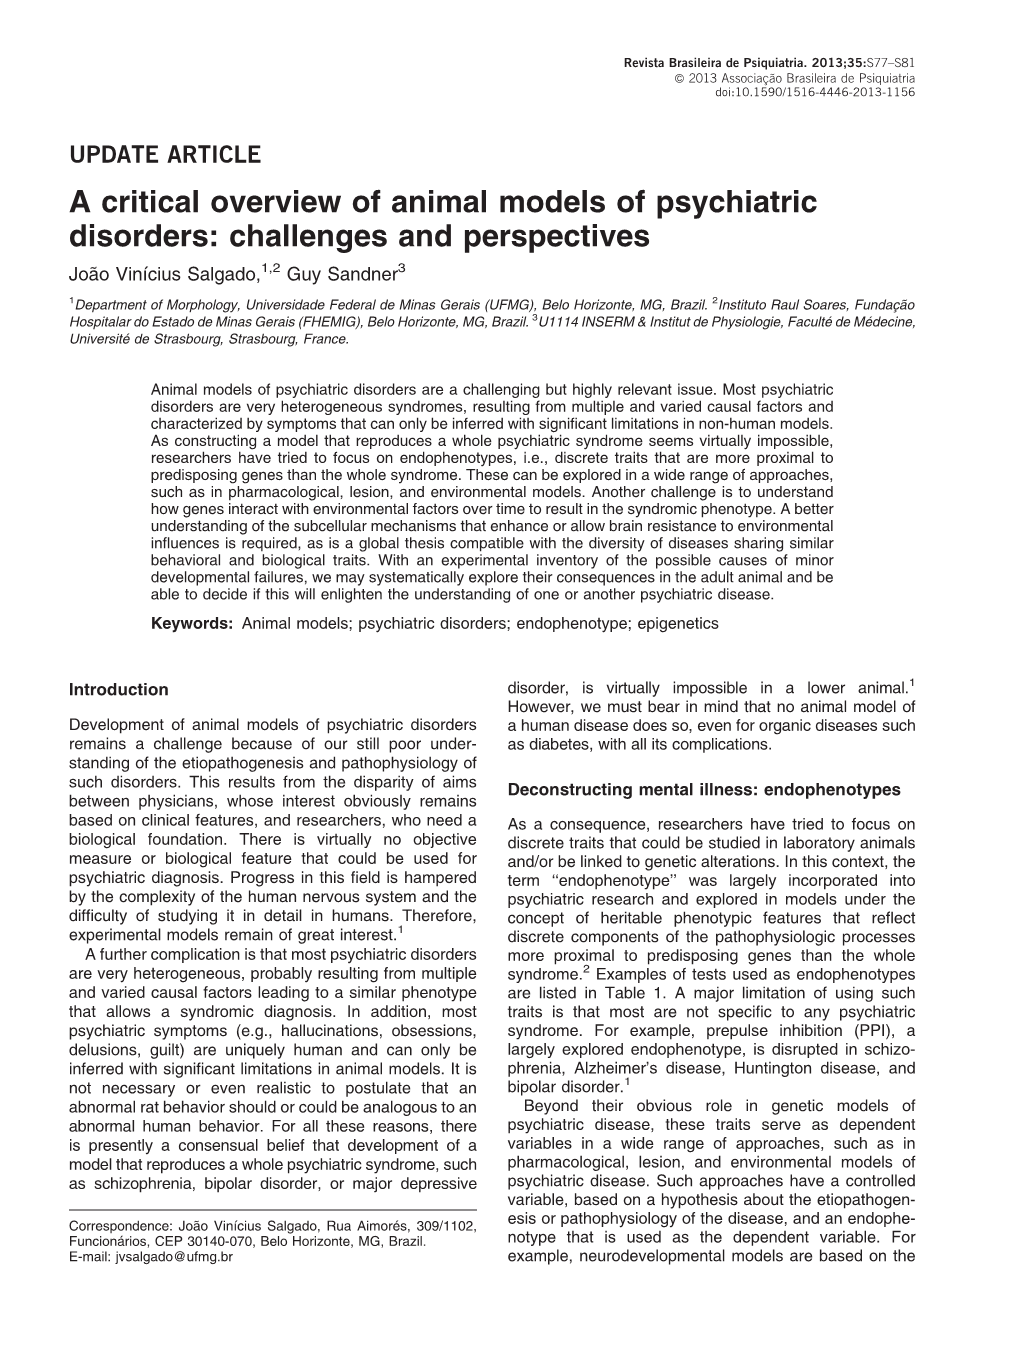 A Critical Overview of Animal Models of Psychiatric Disorders: Challenges and Perspectives Joa˜O Vinı´Cius Salgado,1,2 Guy Sandner3